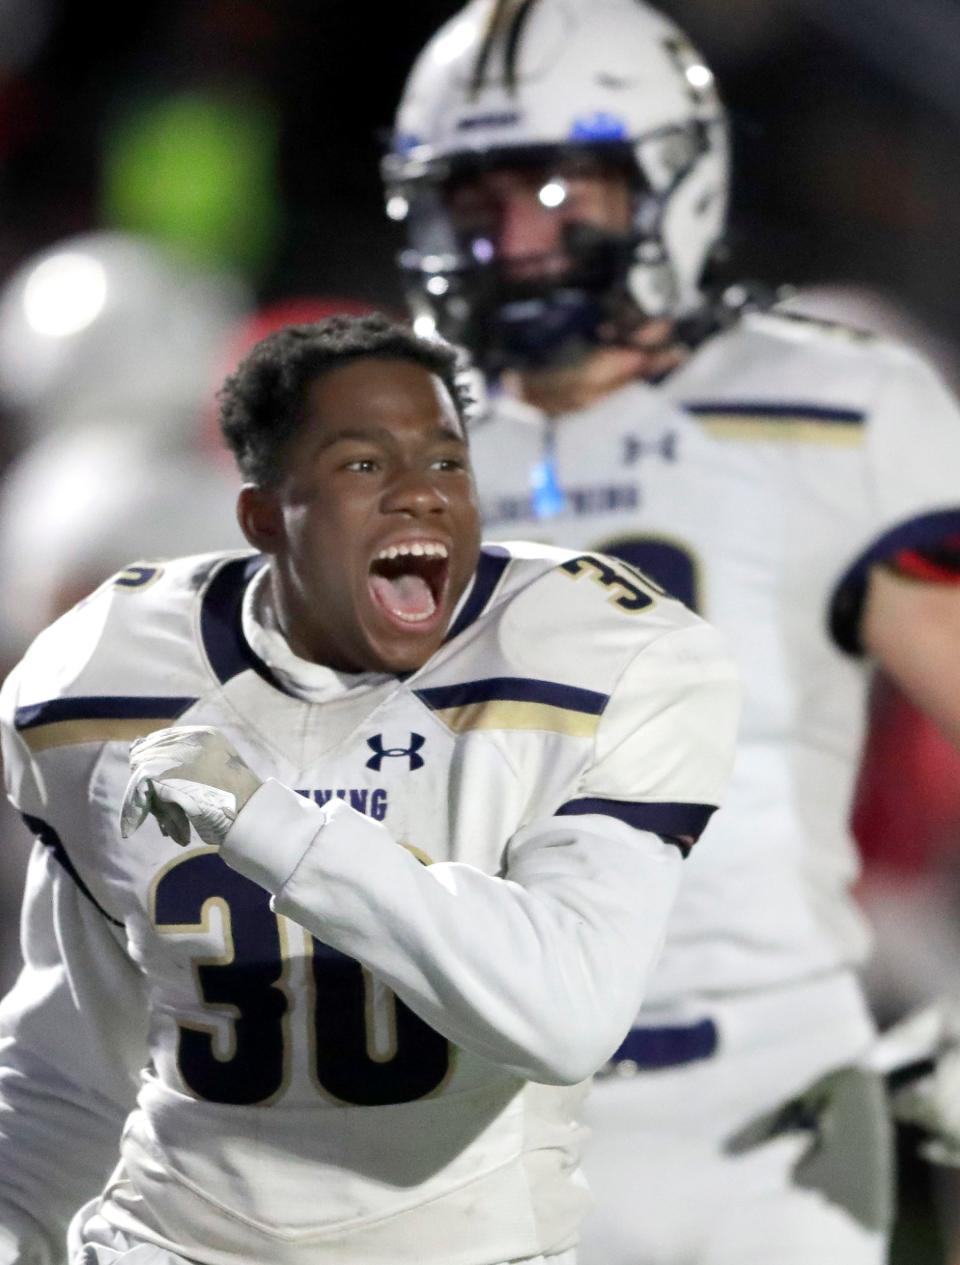 Appleton North's Duke Connors (30) celebrates the team's victory over Kimberly during their WIAA Division 1 state quarterfinal football game Friday in Kimberly. North defeated Kimberly 21-10.